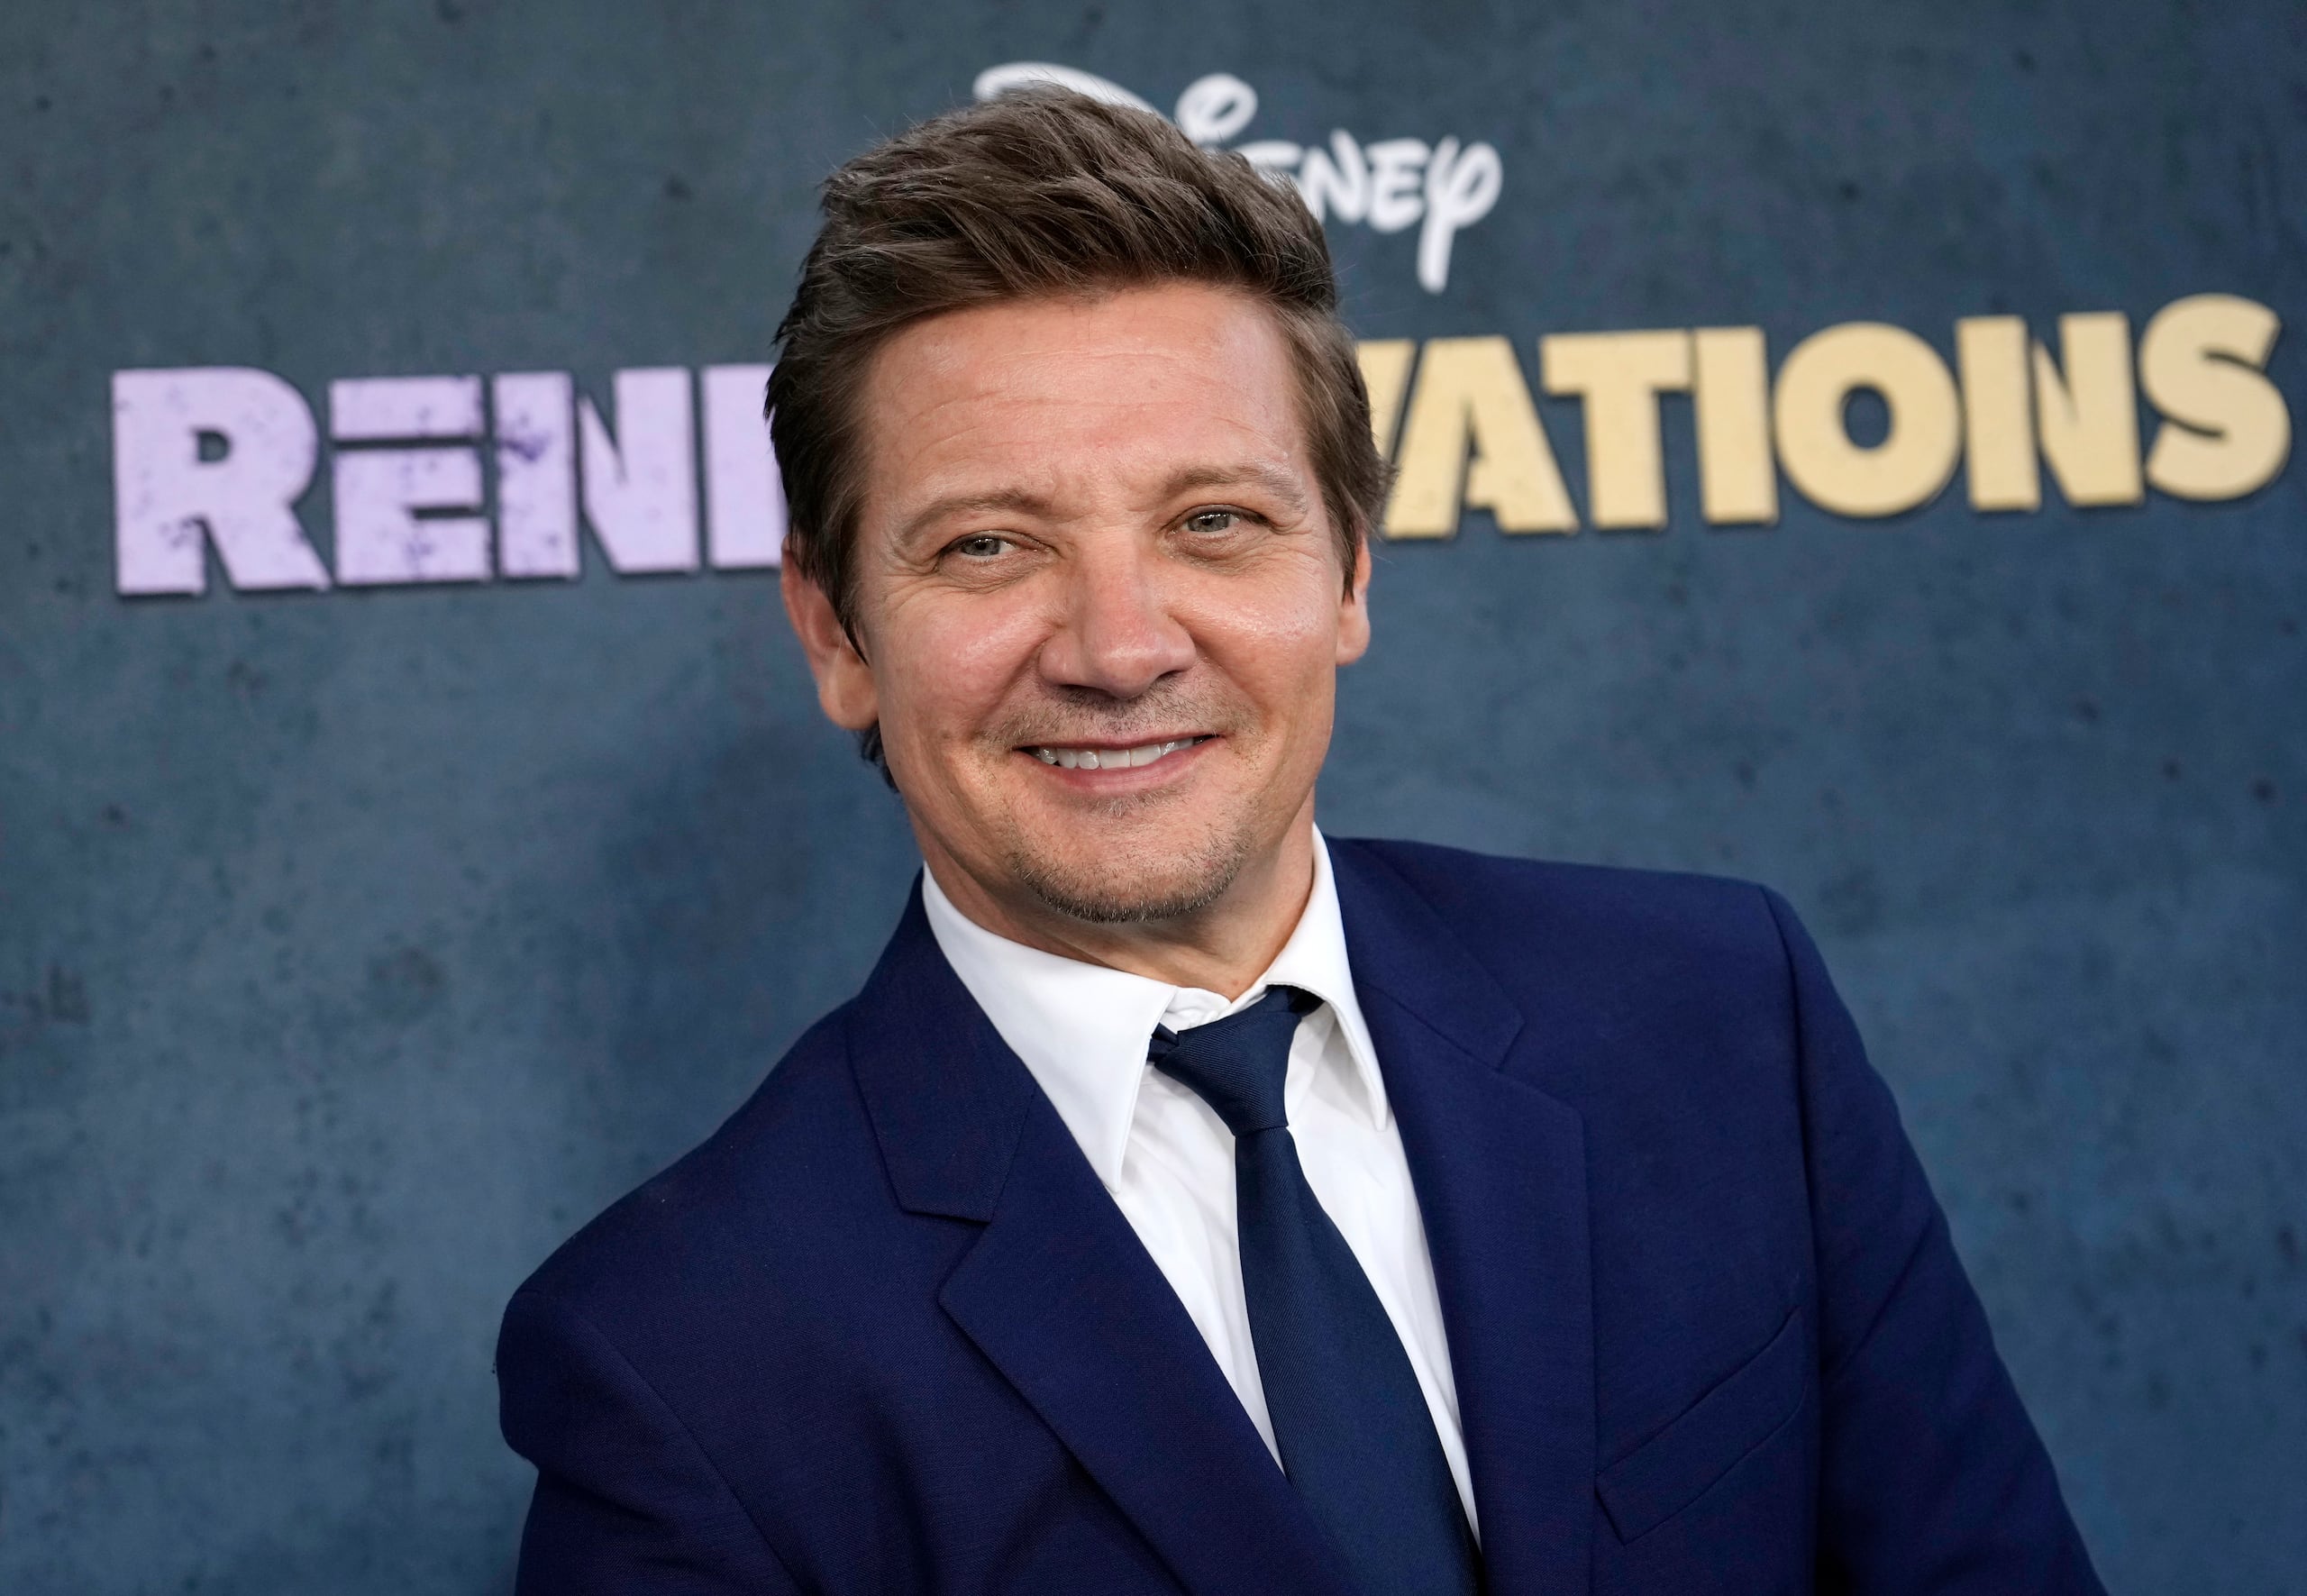 Jeremy Renner, the host and executive producer of "Rennervations," poses at the premiere of the four-part Disney+ docuseries, Tuesday, April 11, 2023, at the Westwood Regency Village Theatre in Los Angeles. The premiere marked Renner's first public, in-person appearance since a Jan. 1 snow plow accident outside his Reno, Nev., home left him with life-threatening injuries. (AP Photo/Chris Pizzello)